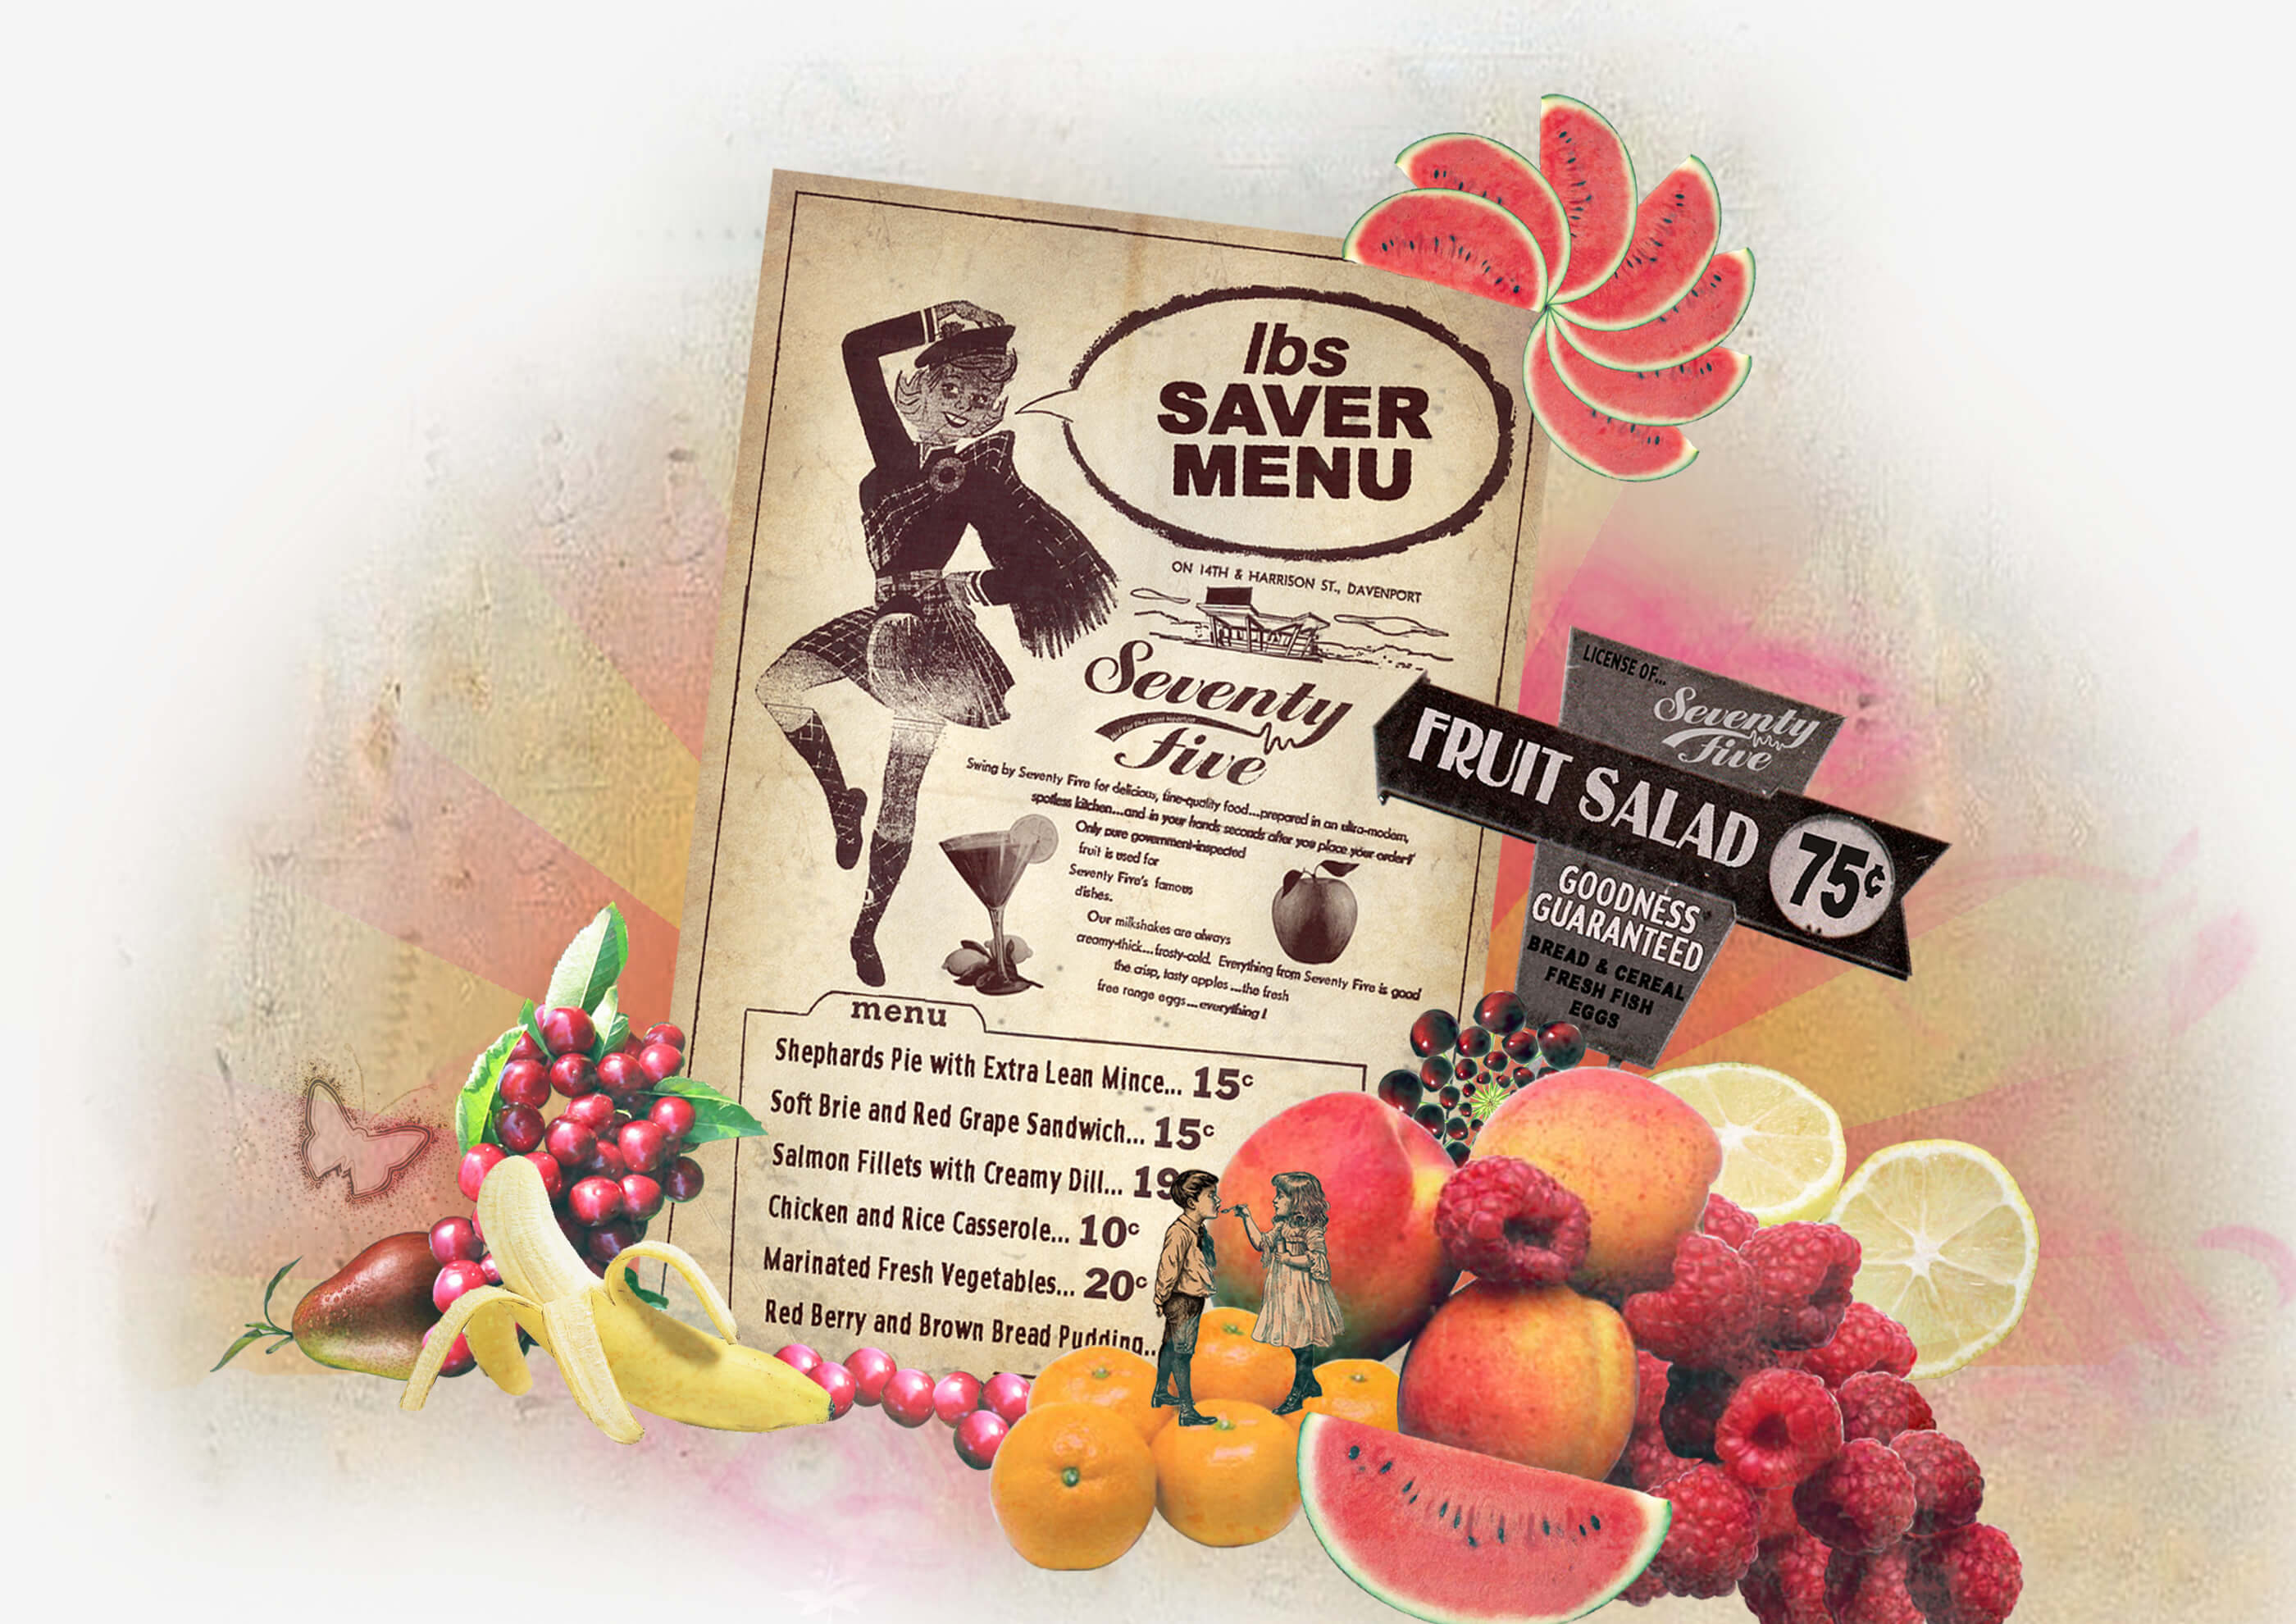 'Lbs Saver Menu' t shirt illustration, featuring a vintage food menu of healthy options surrounded by fruit and vegetables